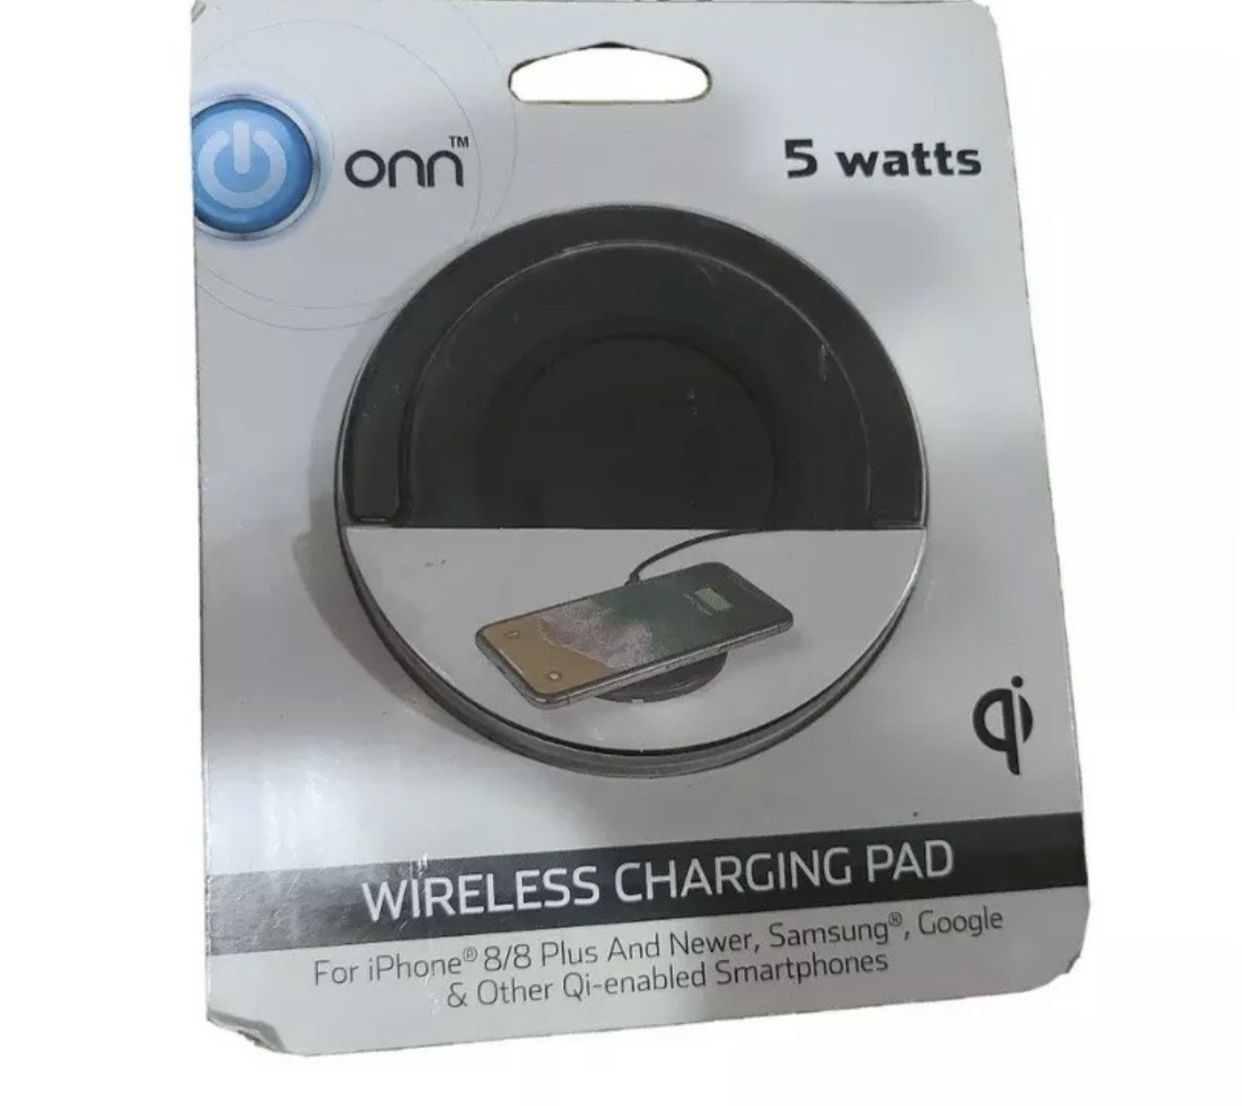 ONN Wireless Charging Pad 5 watts iPhone 8 8 plus Samsung Google and Qi-enabled